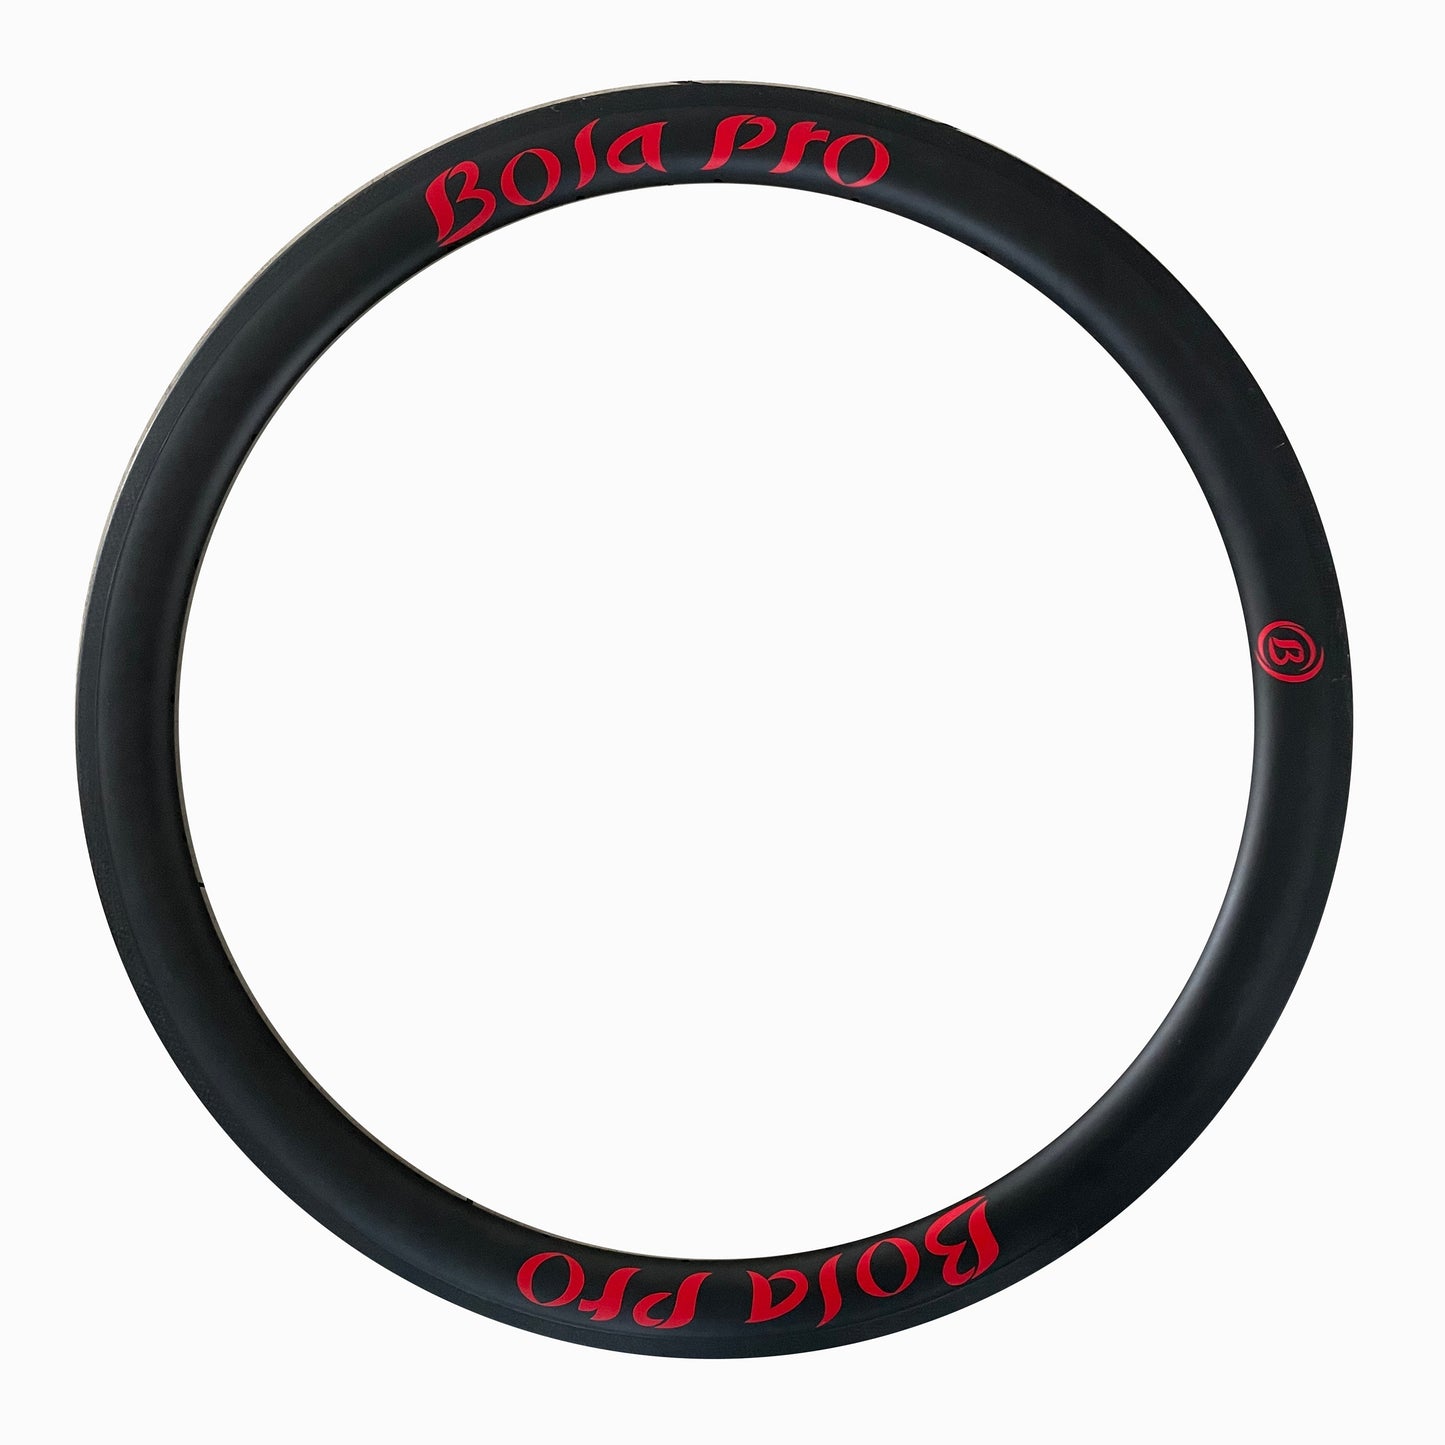 700c tubeless ready carbon vtt rims 45mm high 28mm outer wide  21mm inner wide,hooked or hookless design